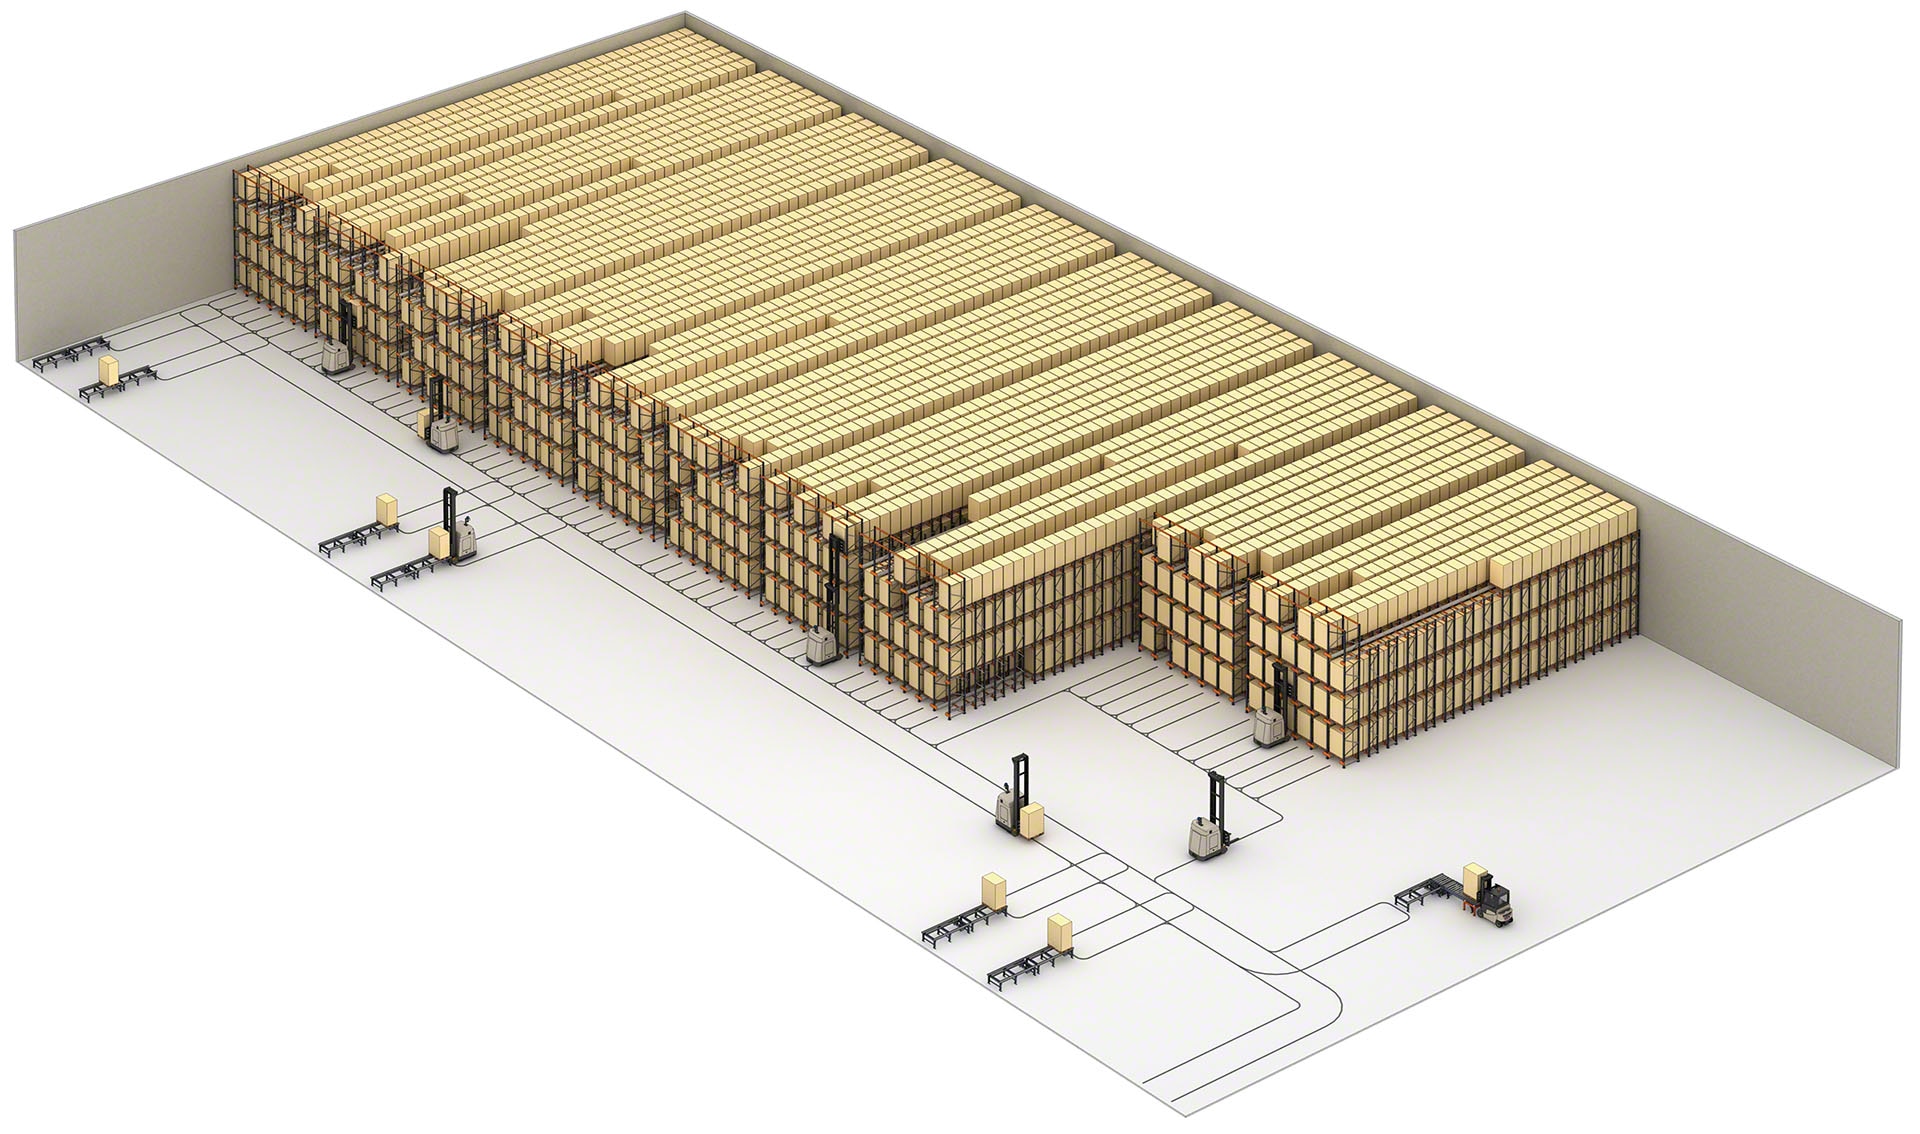 The Pallet Shuttle system can work with AGVs to fully-automate a warehouse